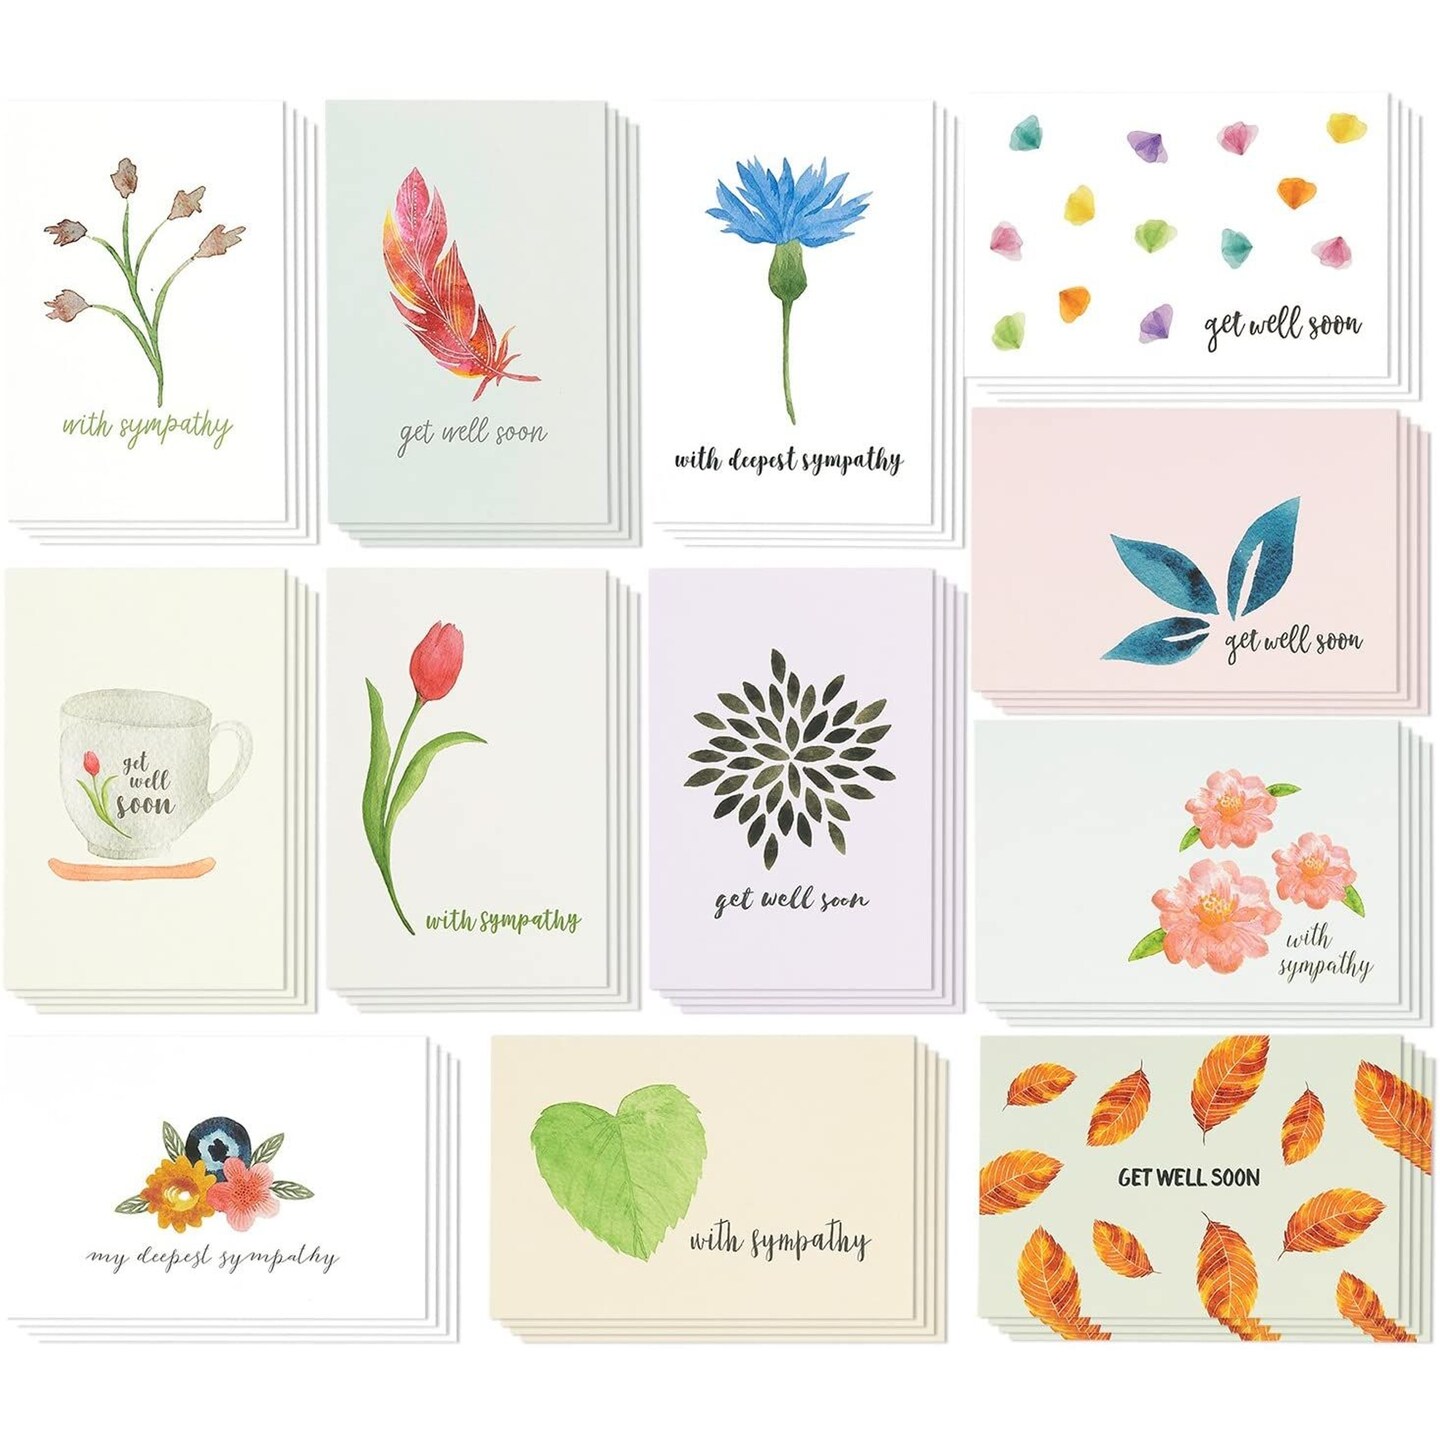 48 Pack Get Well Soon Sympathy Cards with Envelopes, Bulk Assortment Box  with 12 Designs, Blank Inside (4x6 inch)